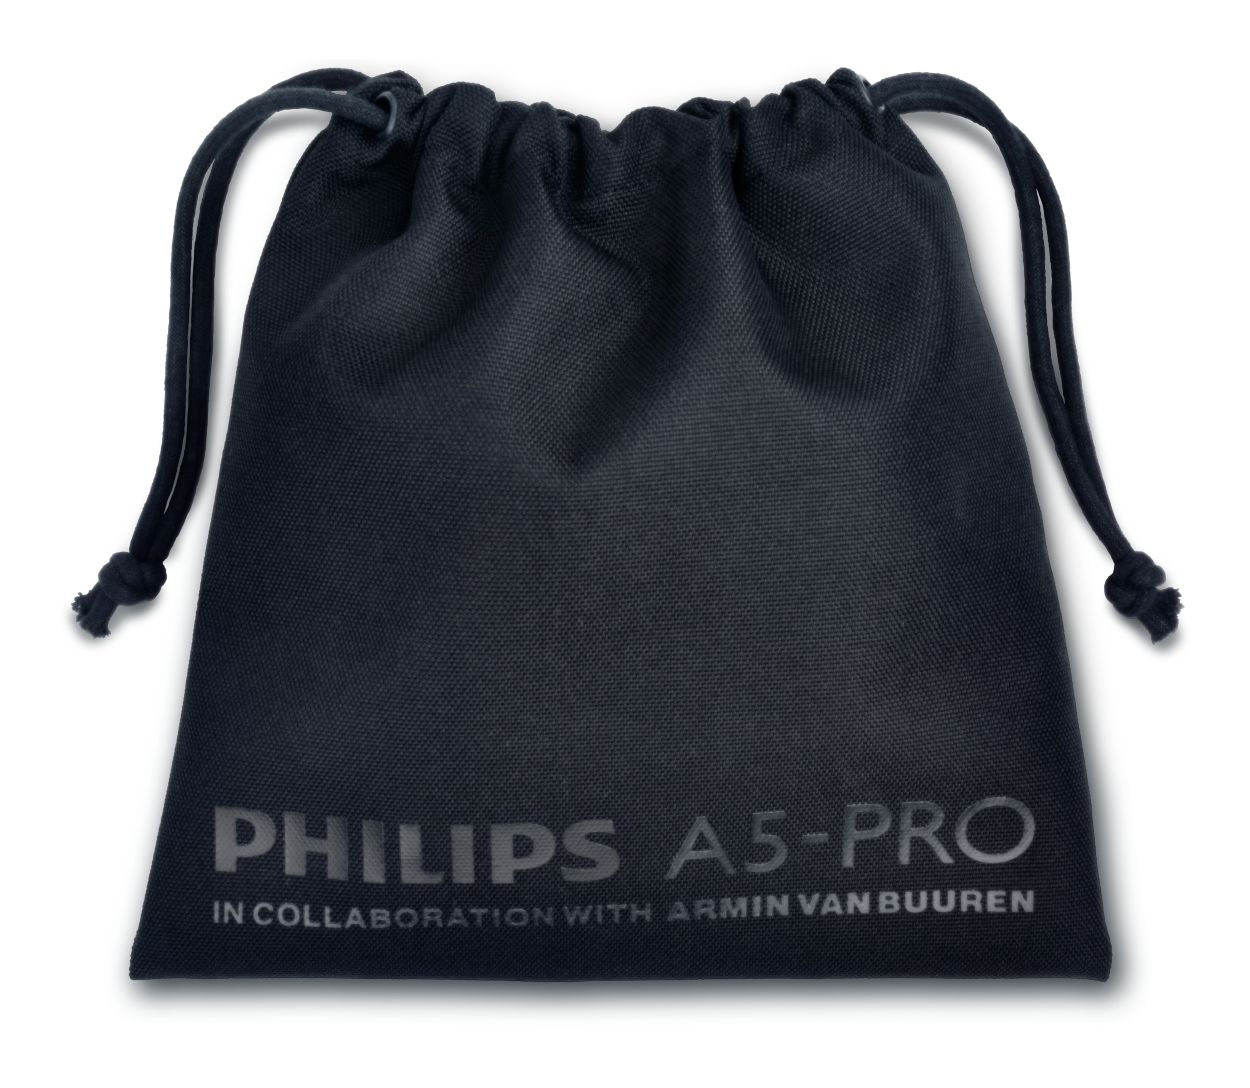 Auriculares Philips - A5-PRO - Recycle & Company